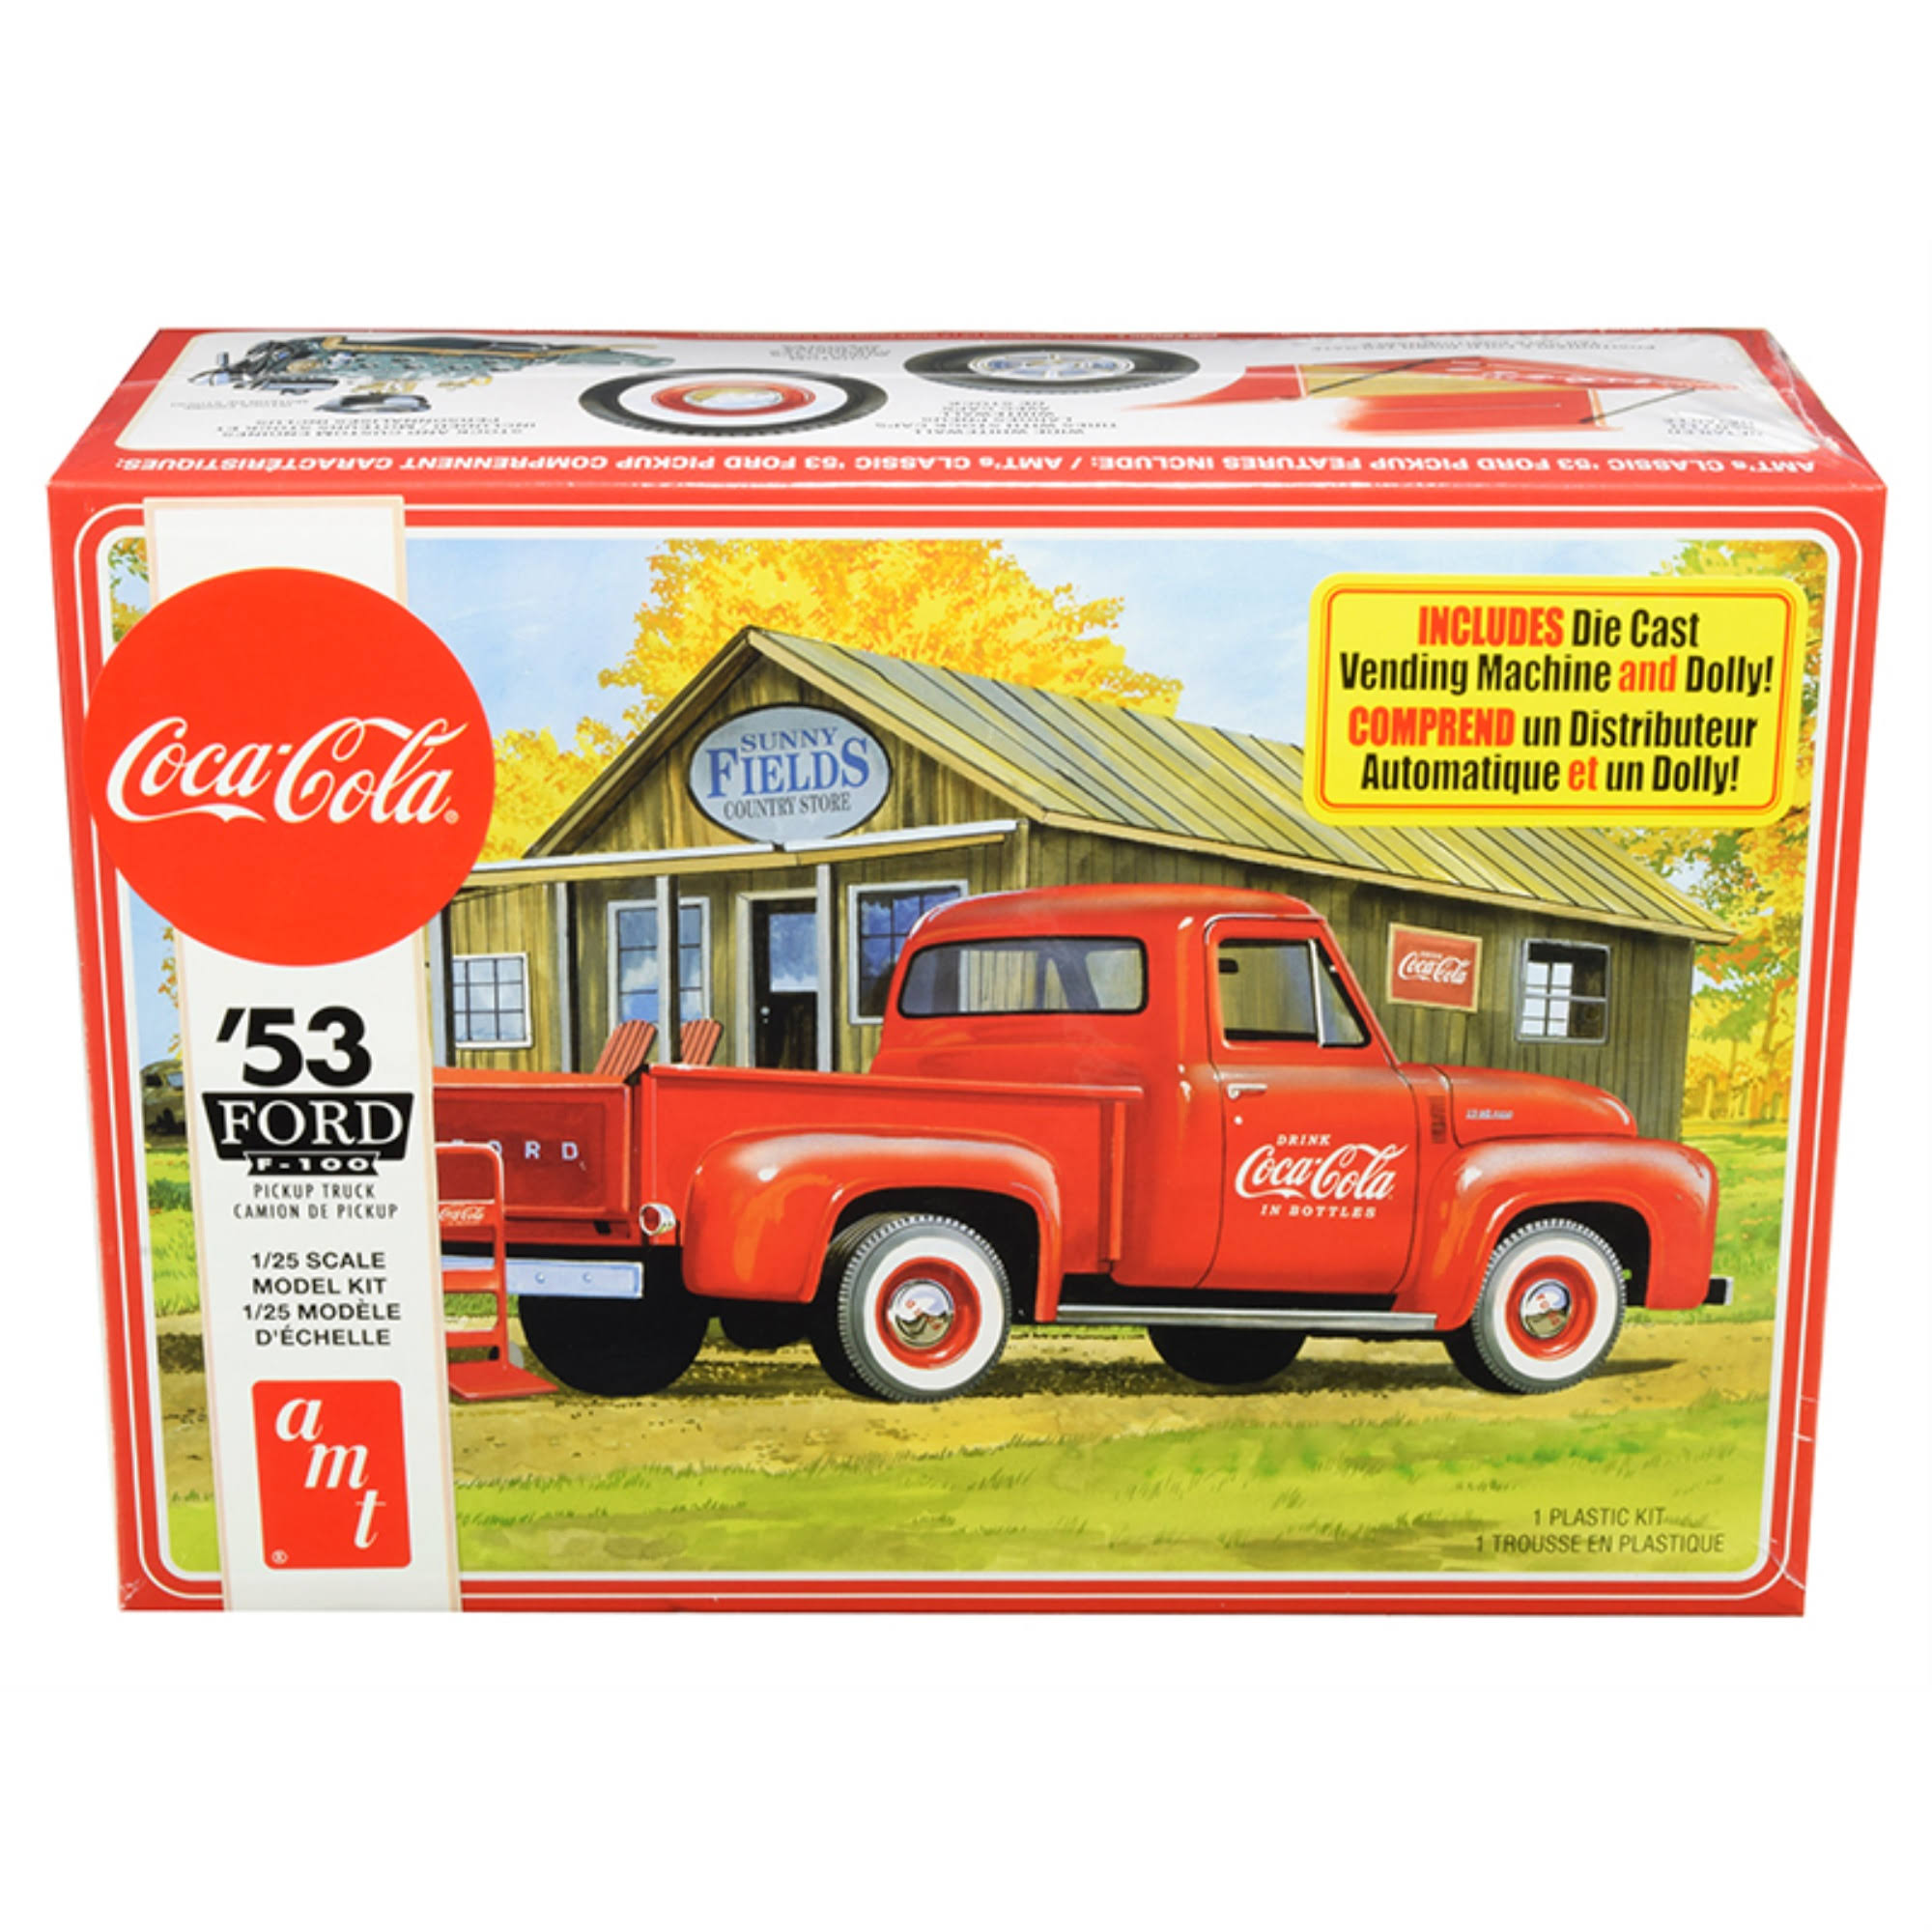 AMT 1144m 1953 Ford Pickup Coca Cola 2t Model Kit - 1/25 Scale